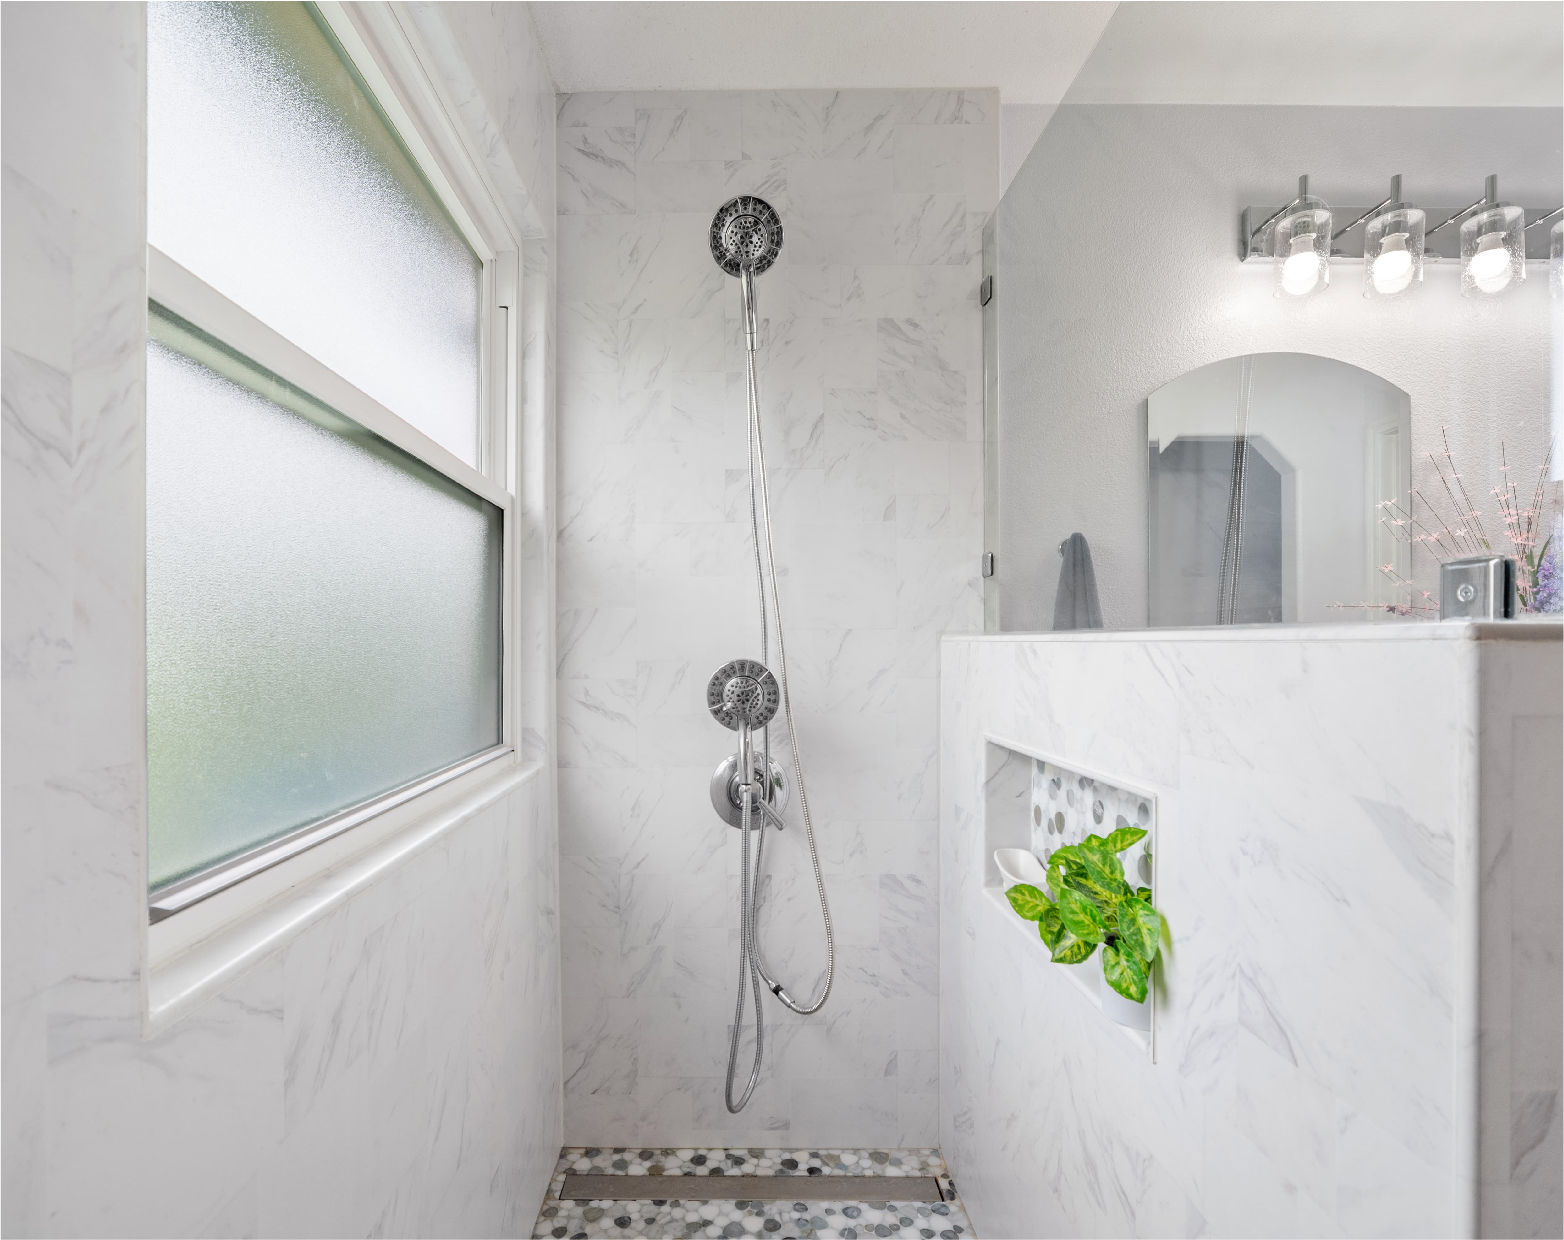 Up Your Relaxation Game With These Shower Remodeling Ideas